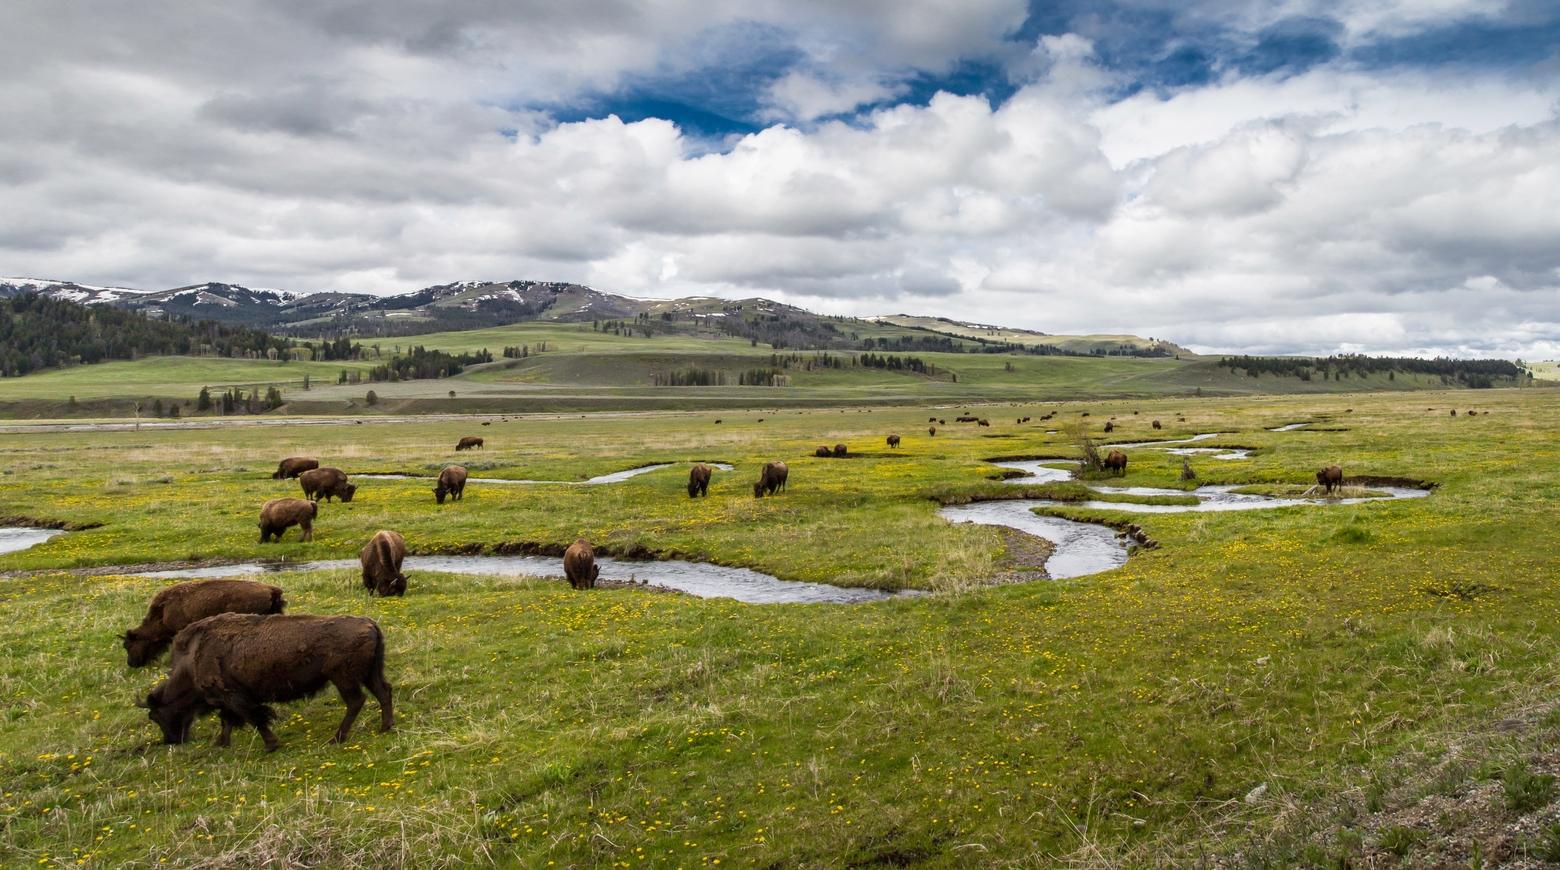 Wenk devoted the final months of his 43-year career with the National Park Service to drawing up a plan to manage Yellowstone's bison herds. NPS is currently reviewing public comment on the current bison management plan. Here, bison graze along Rose Creek in the Lamar Valley. Photo by Neal Herbert/NPS